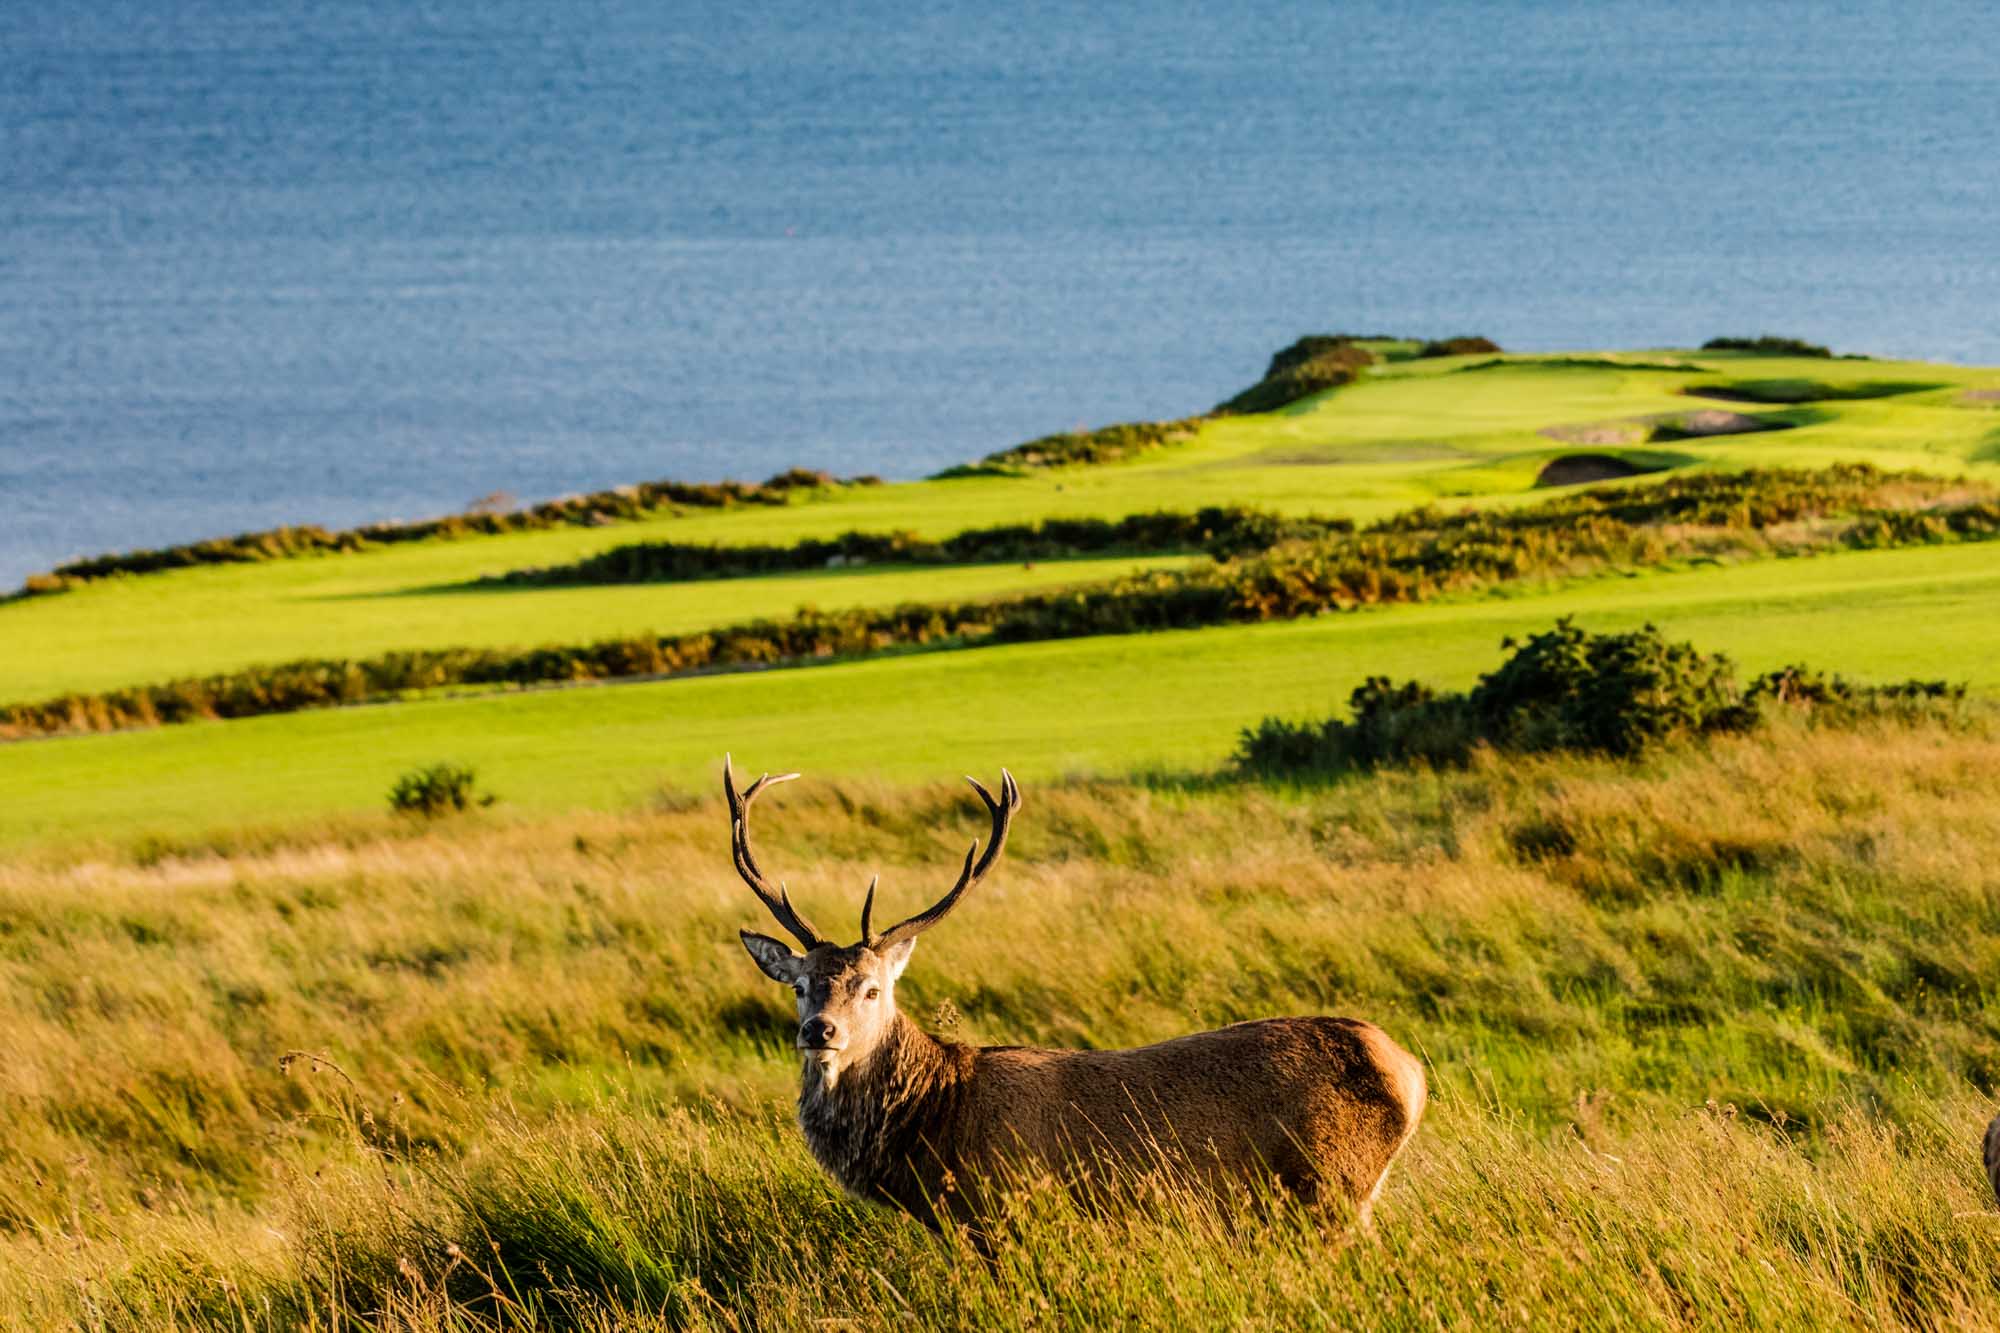 The stags and deer are found roaming the golf course.